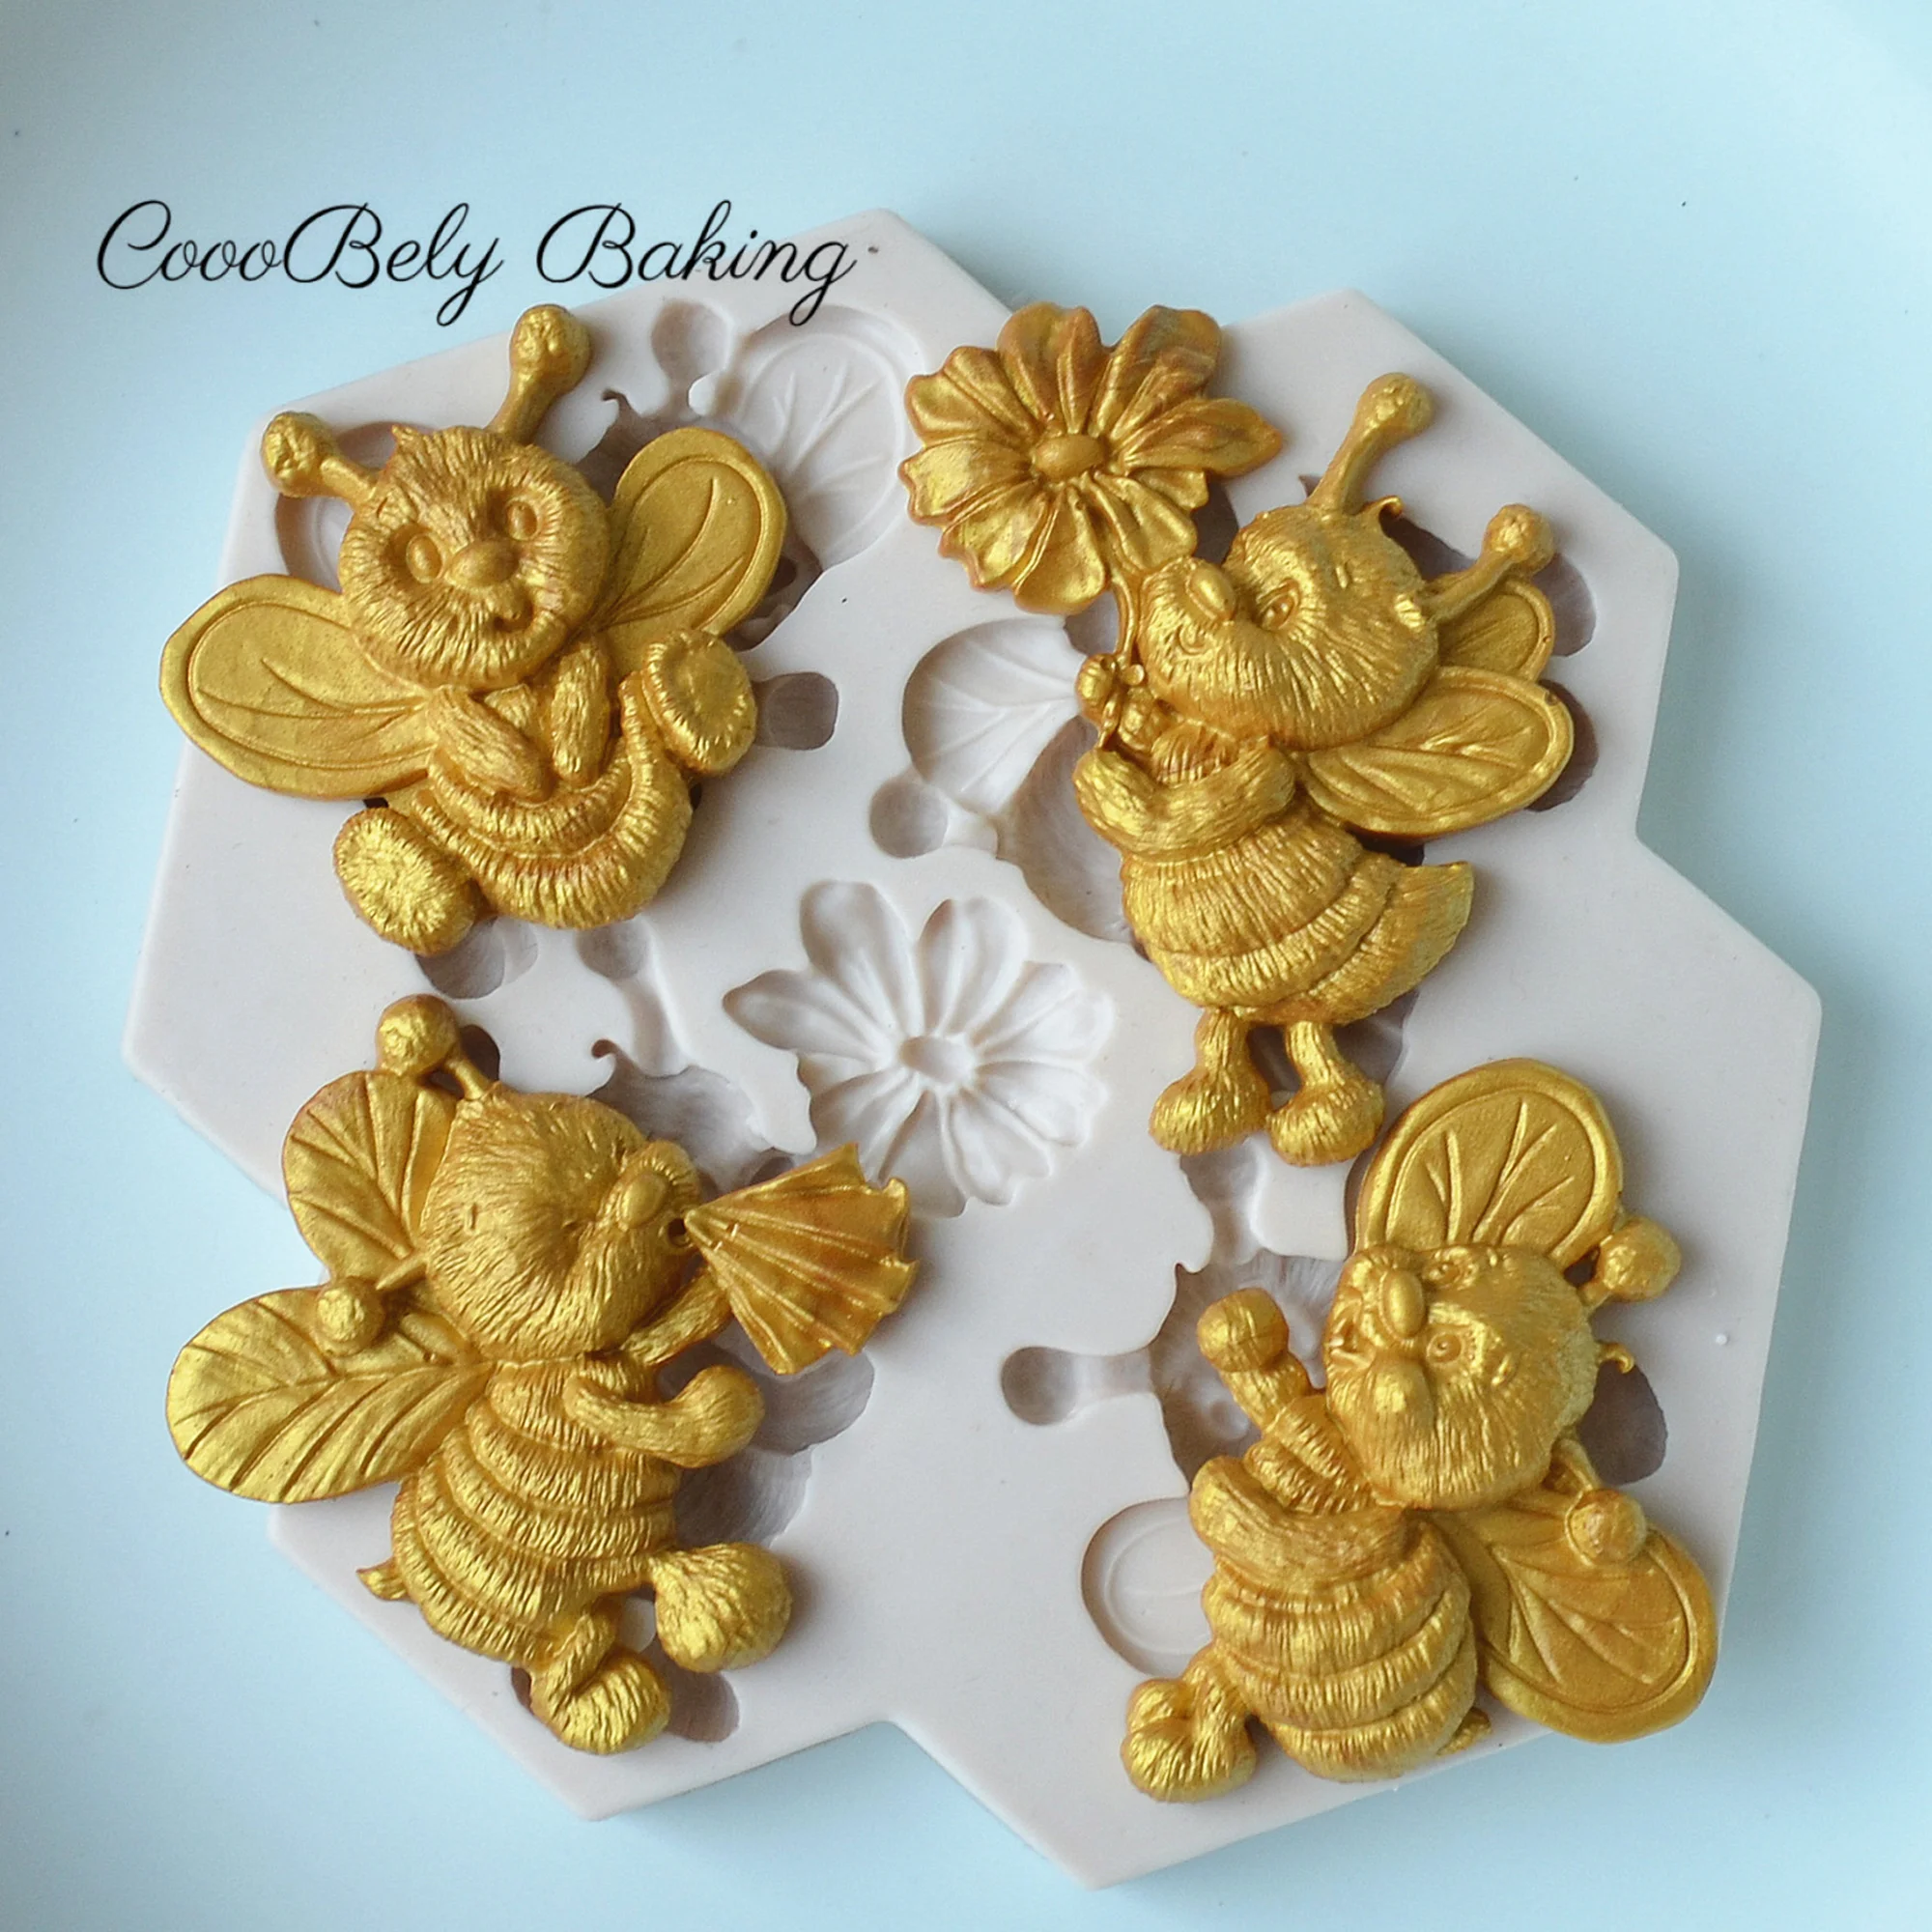 

3D Cute Bee Silicone Mold Fondant Cake Decorating Tools Sugarcraft Chocolate Moulds Gumpaste Baking Cupcake Mold Bakeware XK078